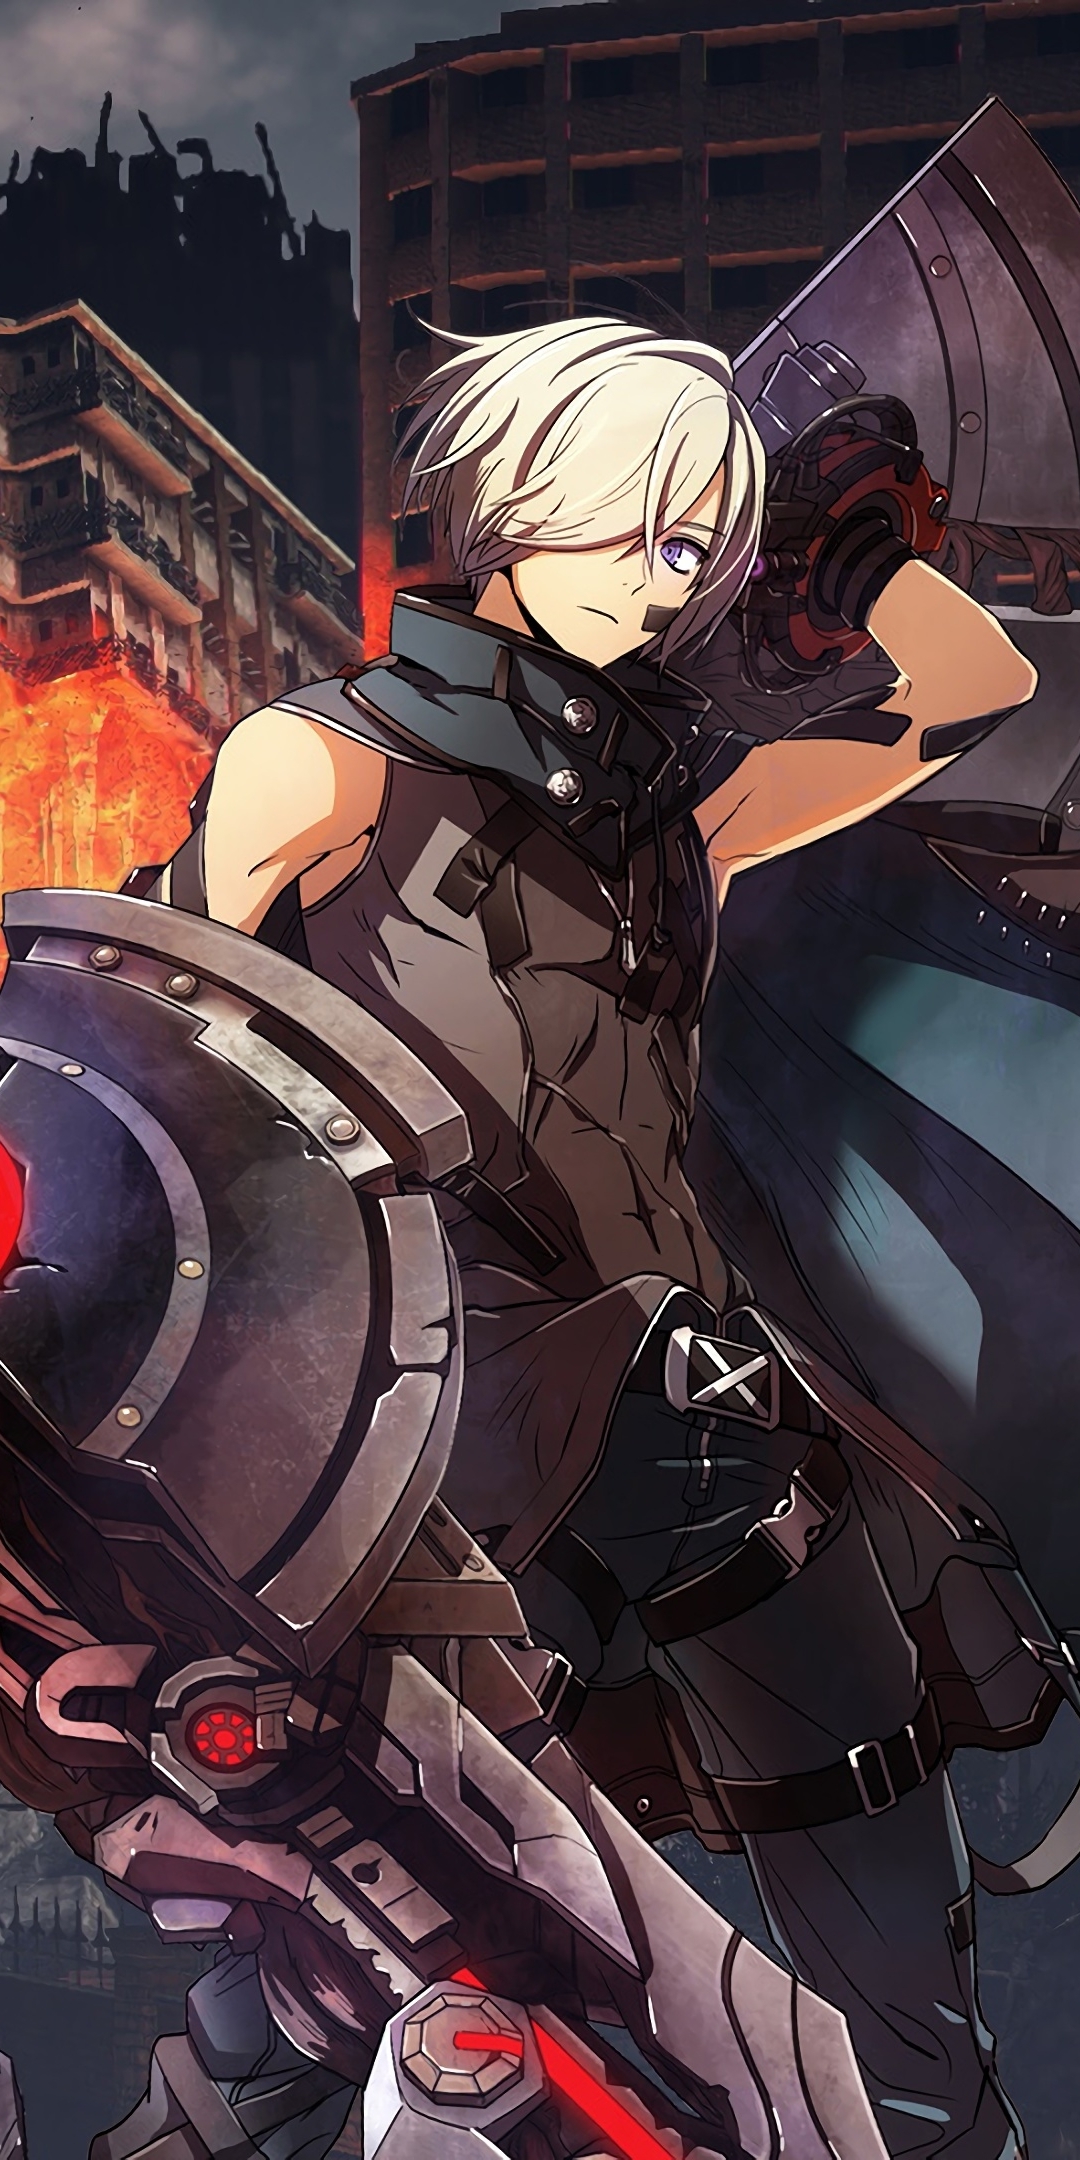 1080x2160 God Eater 3 4k One Plus 5t Honor 7x Honor View 10 Lg Q6 Wallpaper Hd Games 4k Wallpapers Images Photos And Background